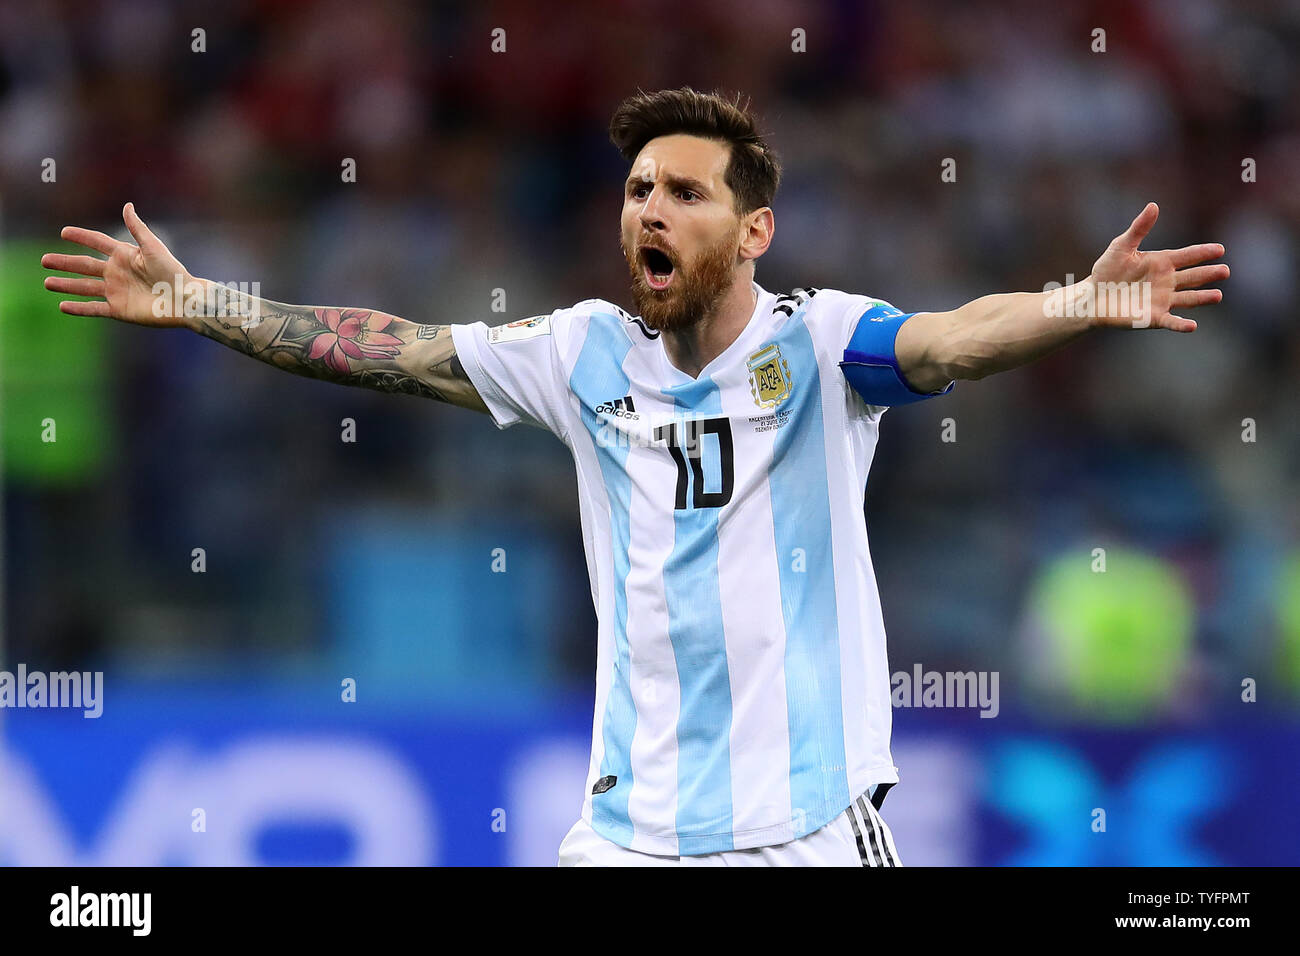 Lionel Messi of Argentina reacts during the 2018 FIFA World Cup Group D match at the Nizhny Novgorod Stadium in Nizhny Novgorod, Russia on June 21, 2018. Photo by Chris Brunskill/UPI Stock Photo